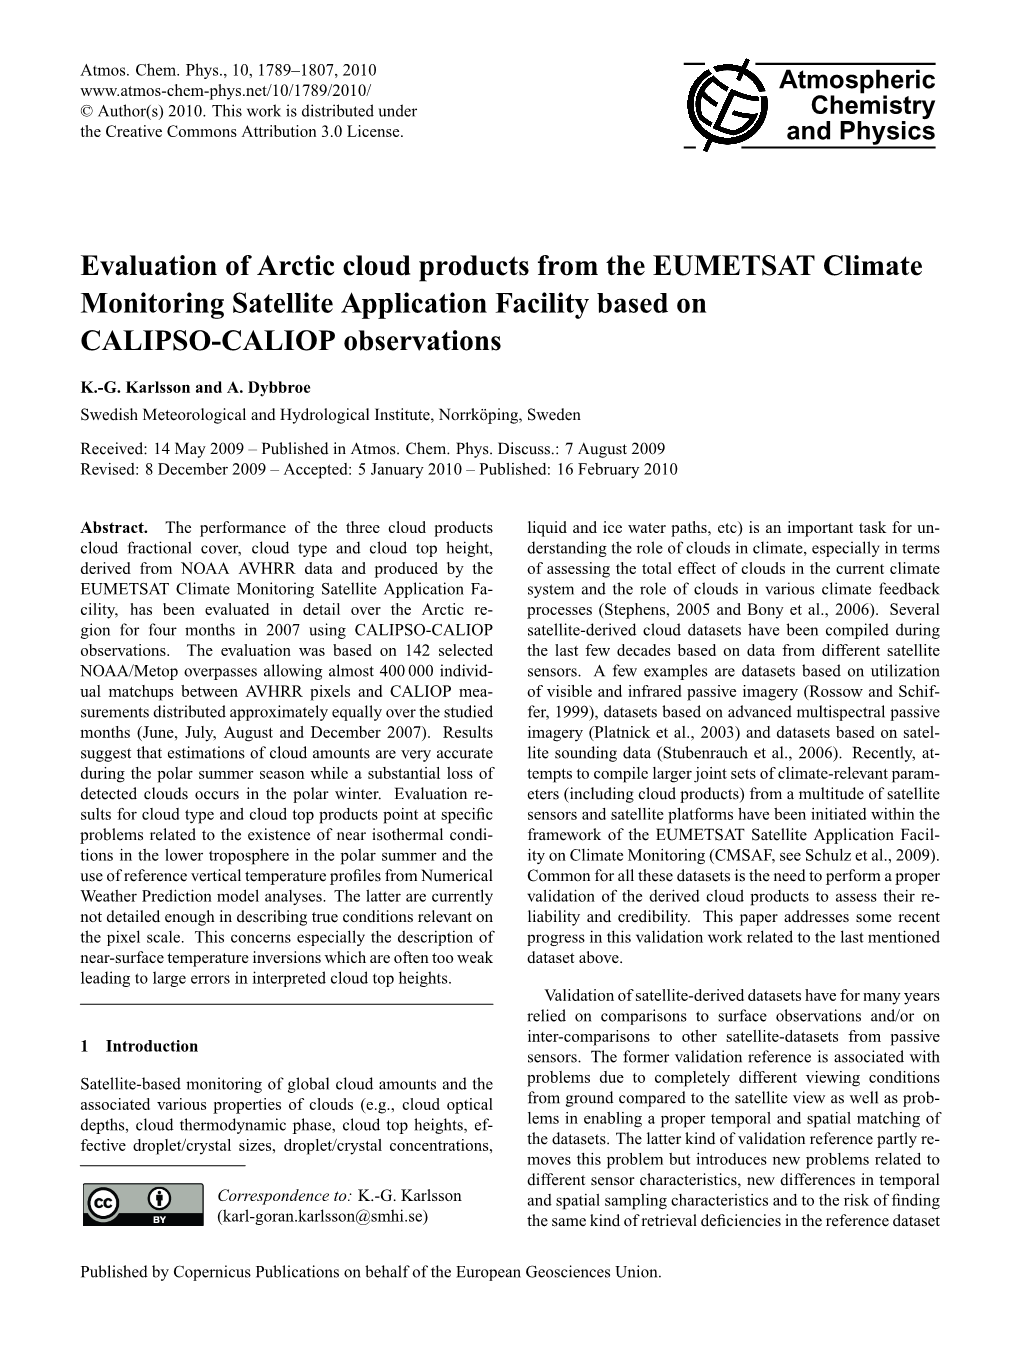 Evaluation of Arctic Cloud Products from the EUMETSAT Climate Monitoring Satellite Application Facility Based on CALIPSO-CALIOP Observations